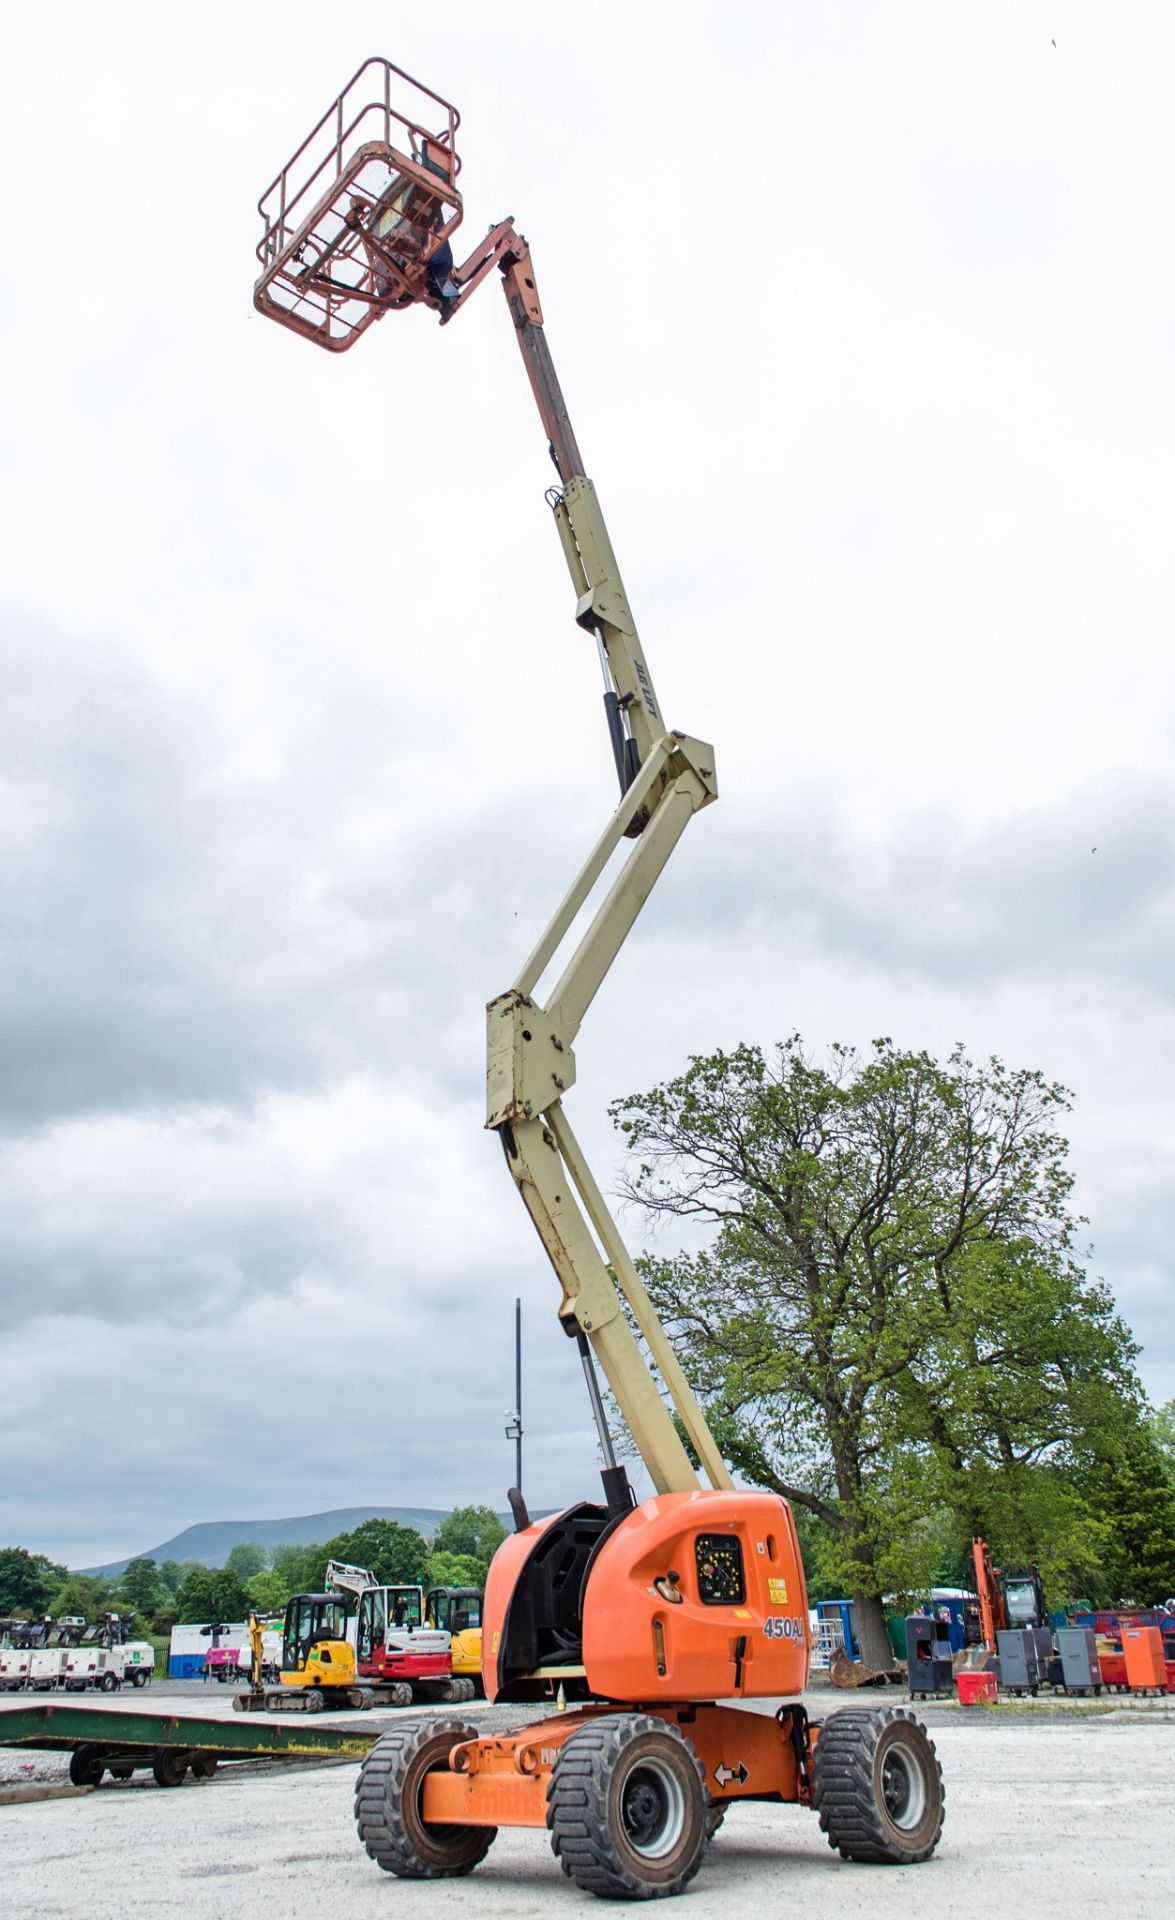 JLG 450 AJ diesel articulated boom access platform Year: 2007 S/N: 1300002963 Recorded Hours: 3467 - Image 11 of 16